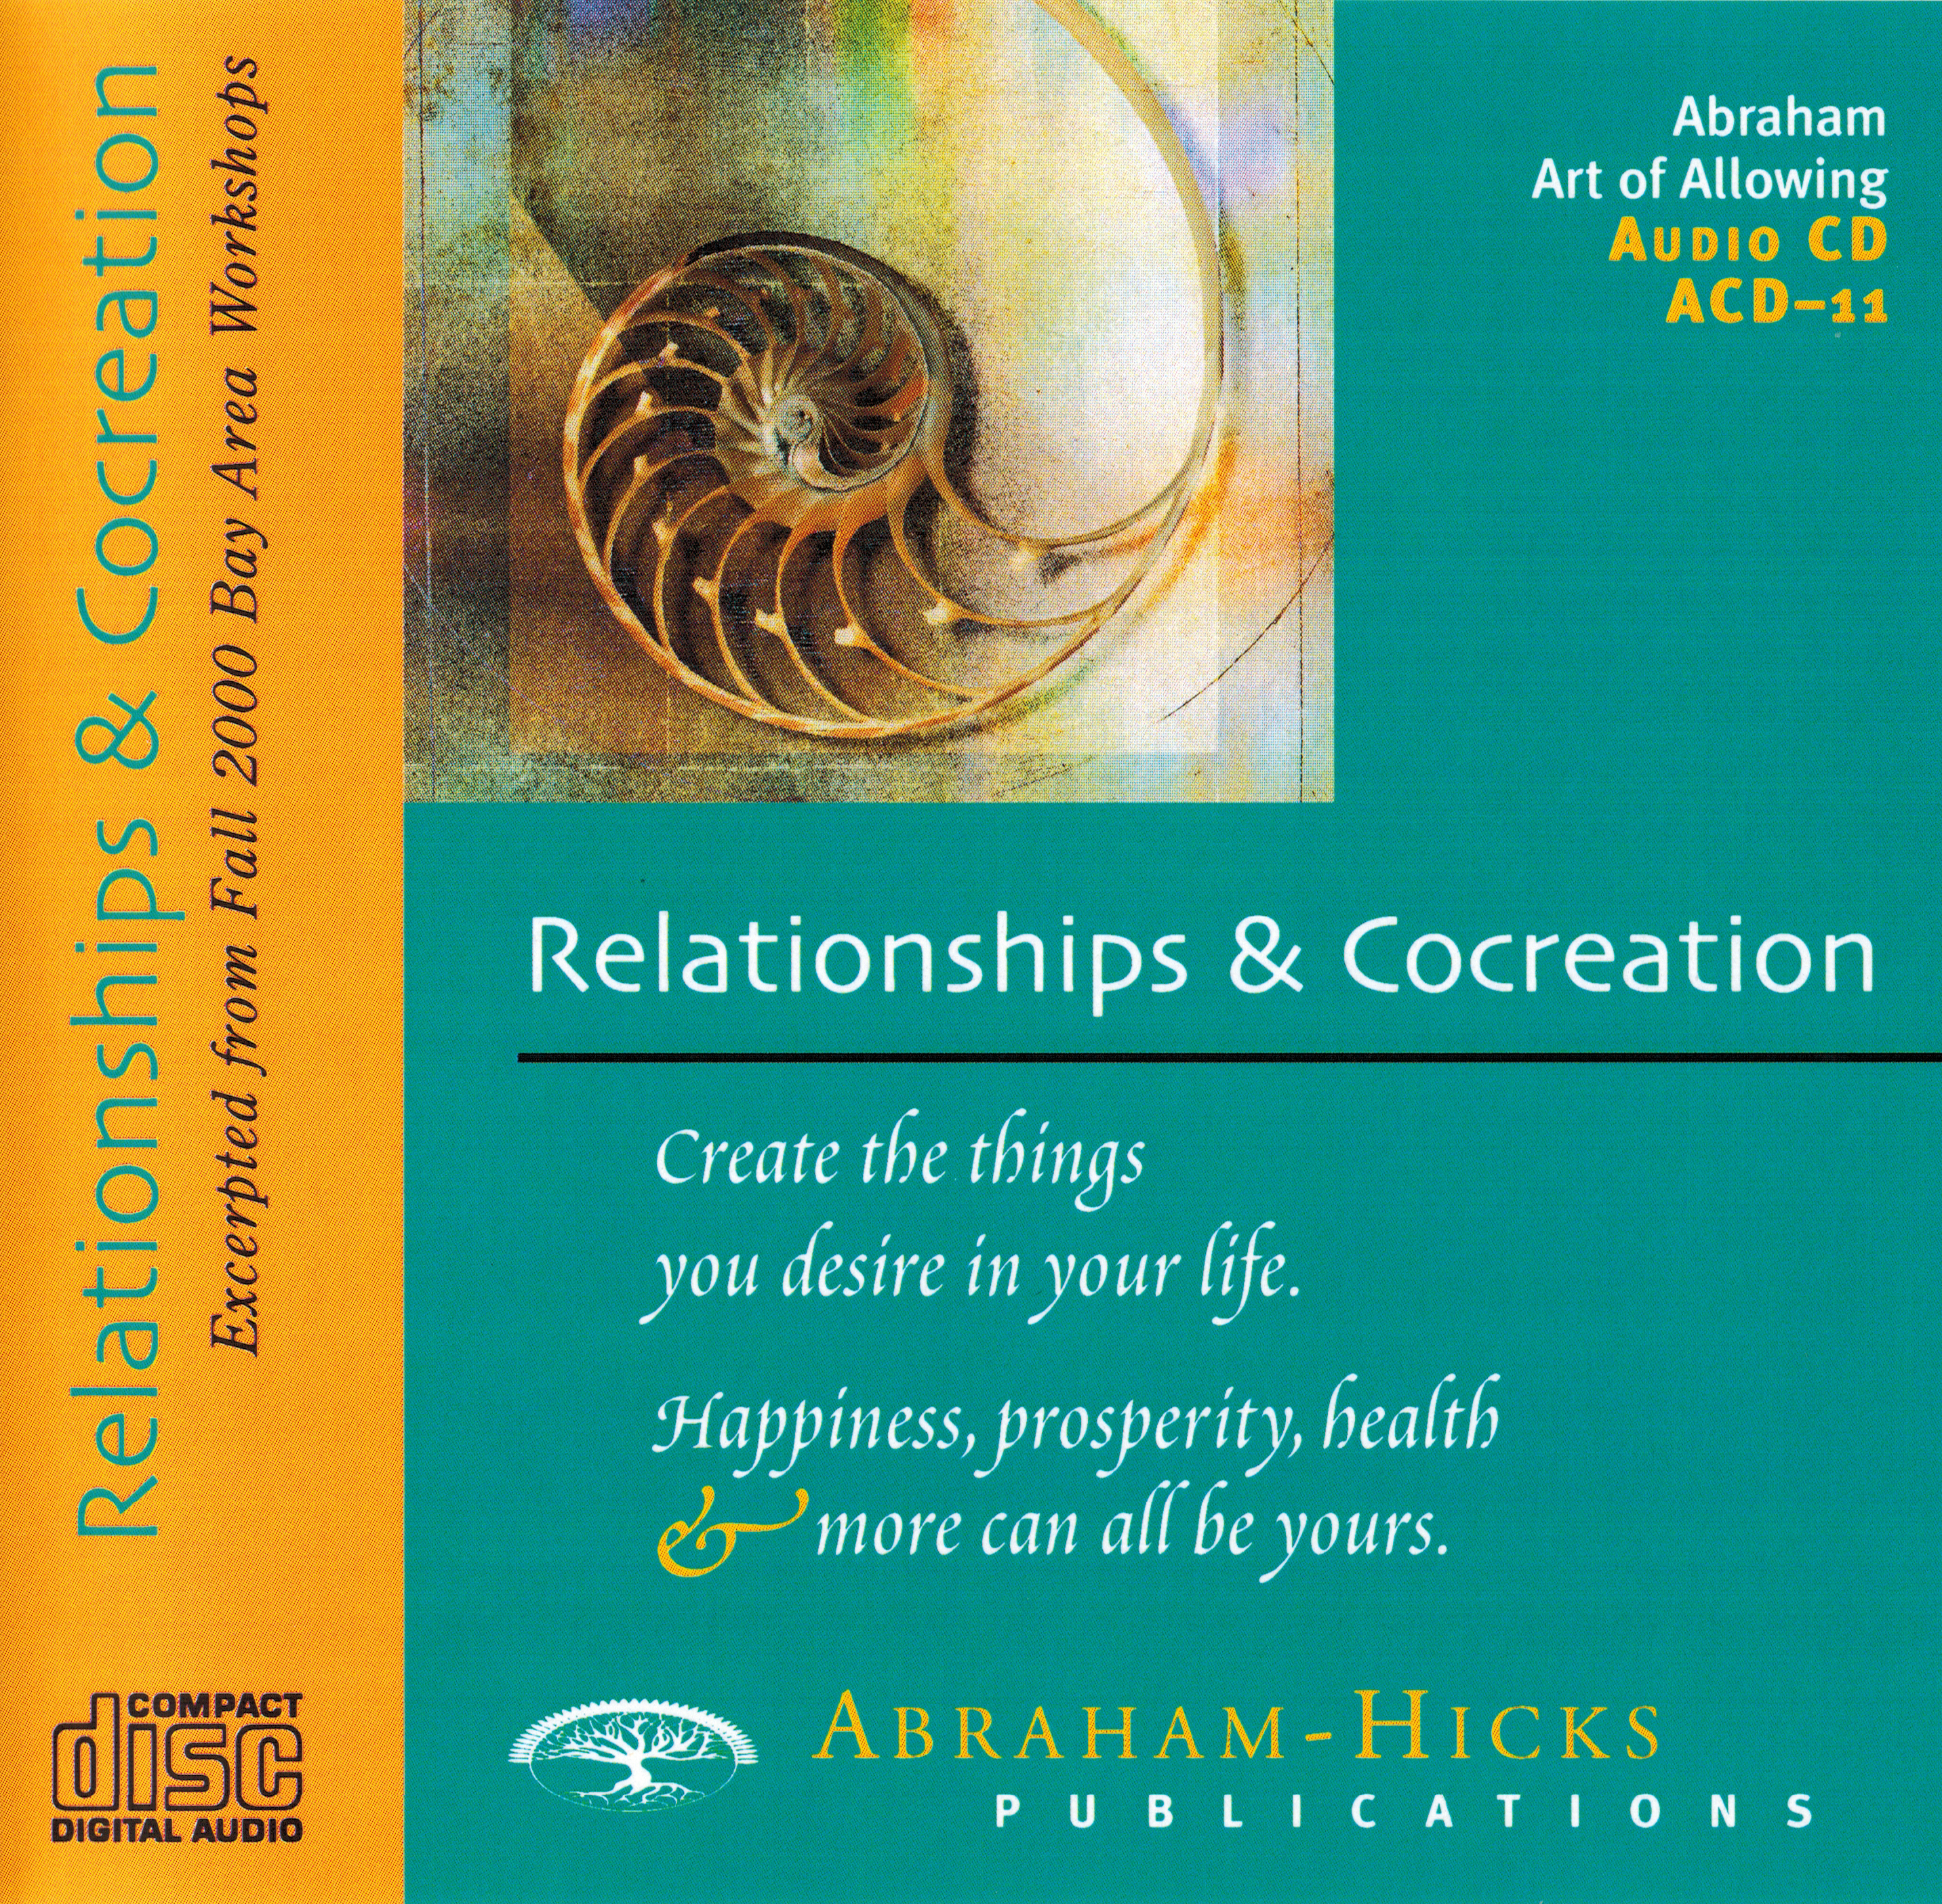 Special Subjects MP3: Relationships & Cocreation